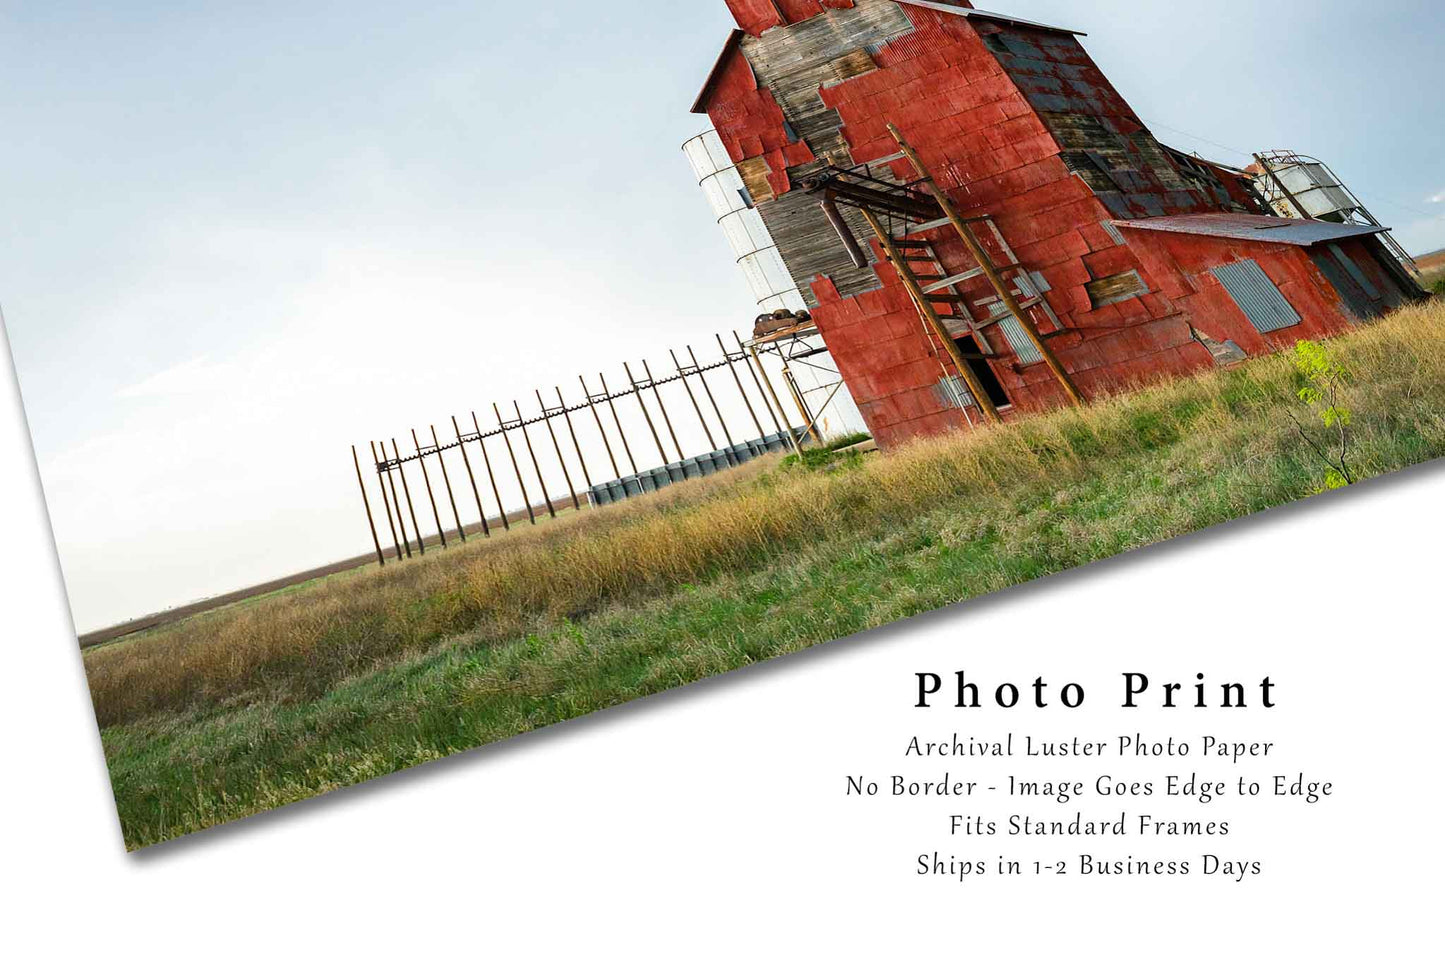 Country Photo Print | Abandoned Wooden Grain Elevator Picture | Texas Wall Art | Farm Photography | Farmhouse Decor